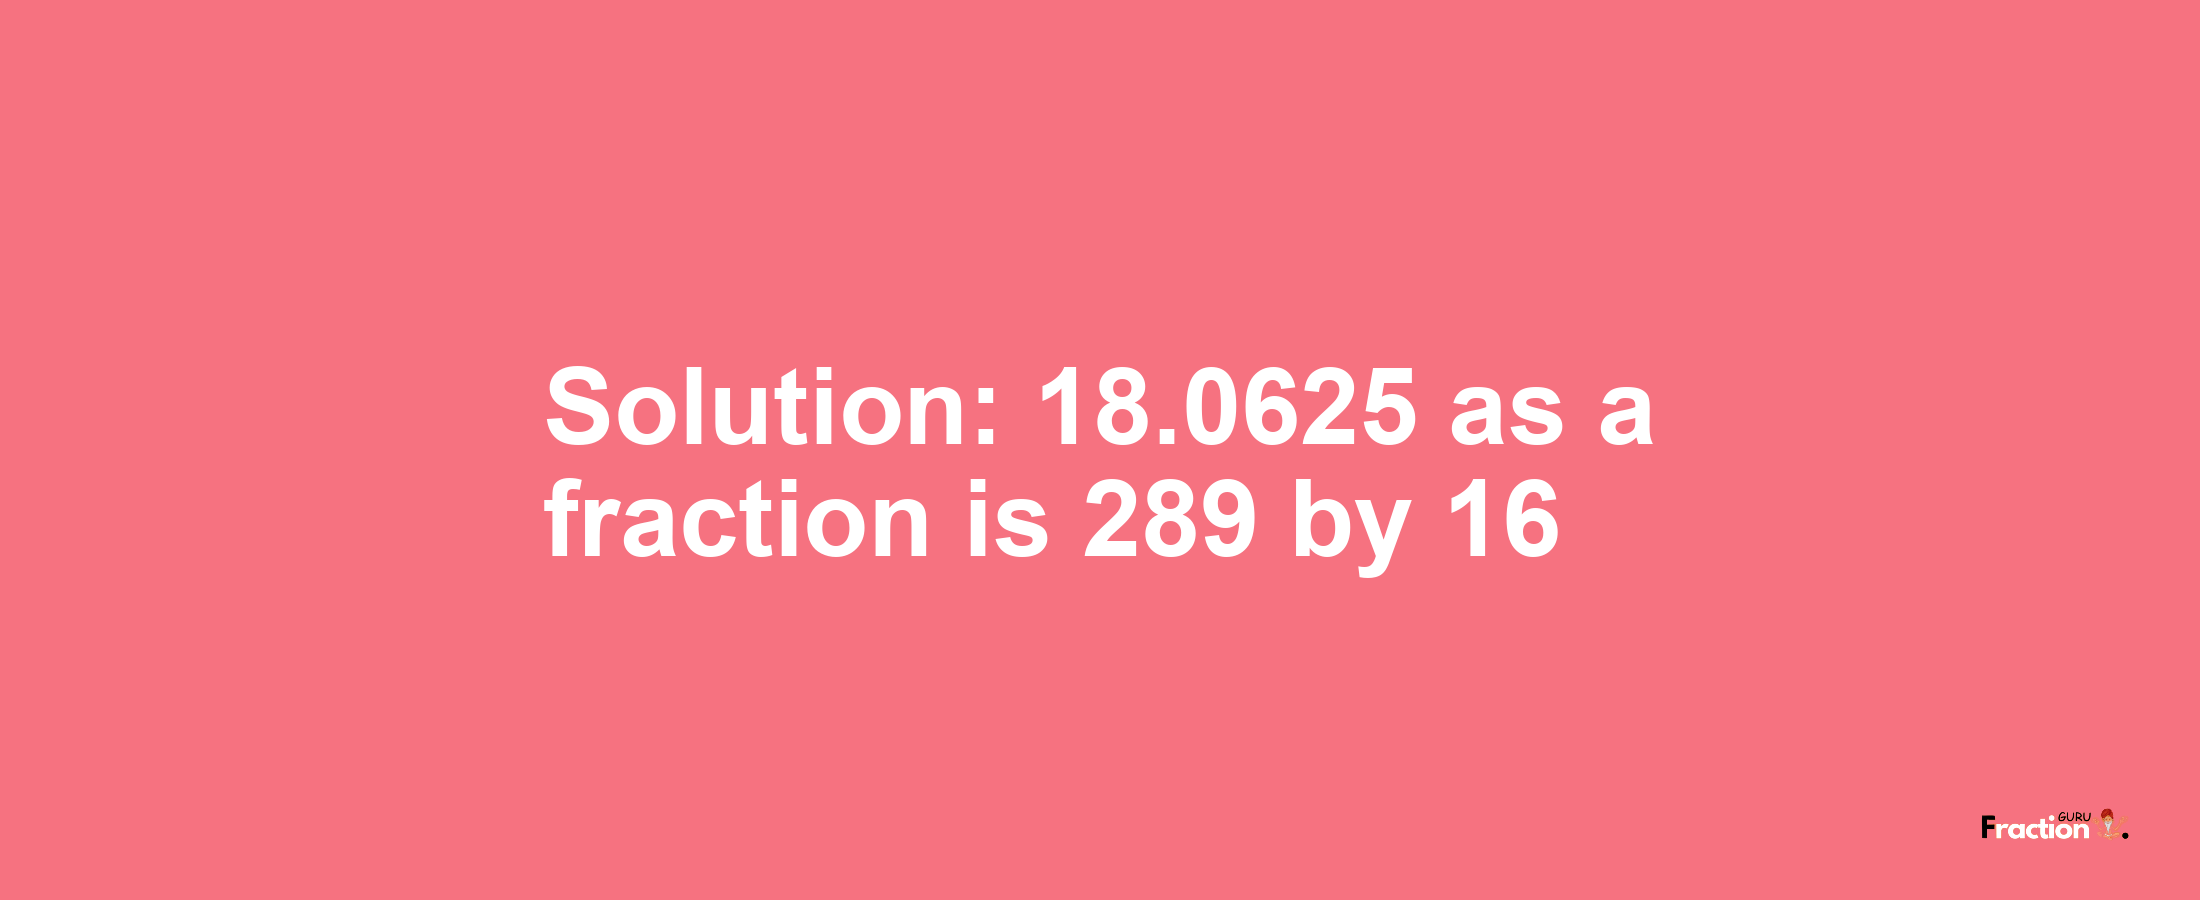 Solution:18.0625 as a fraction is 289/16